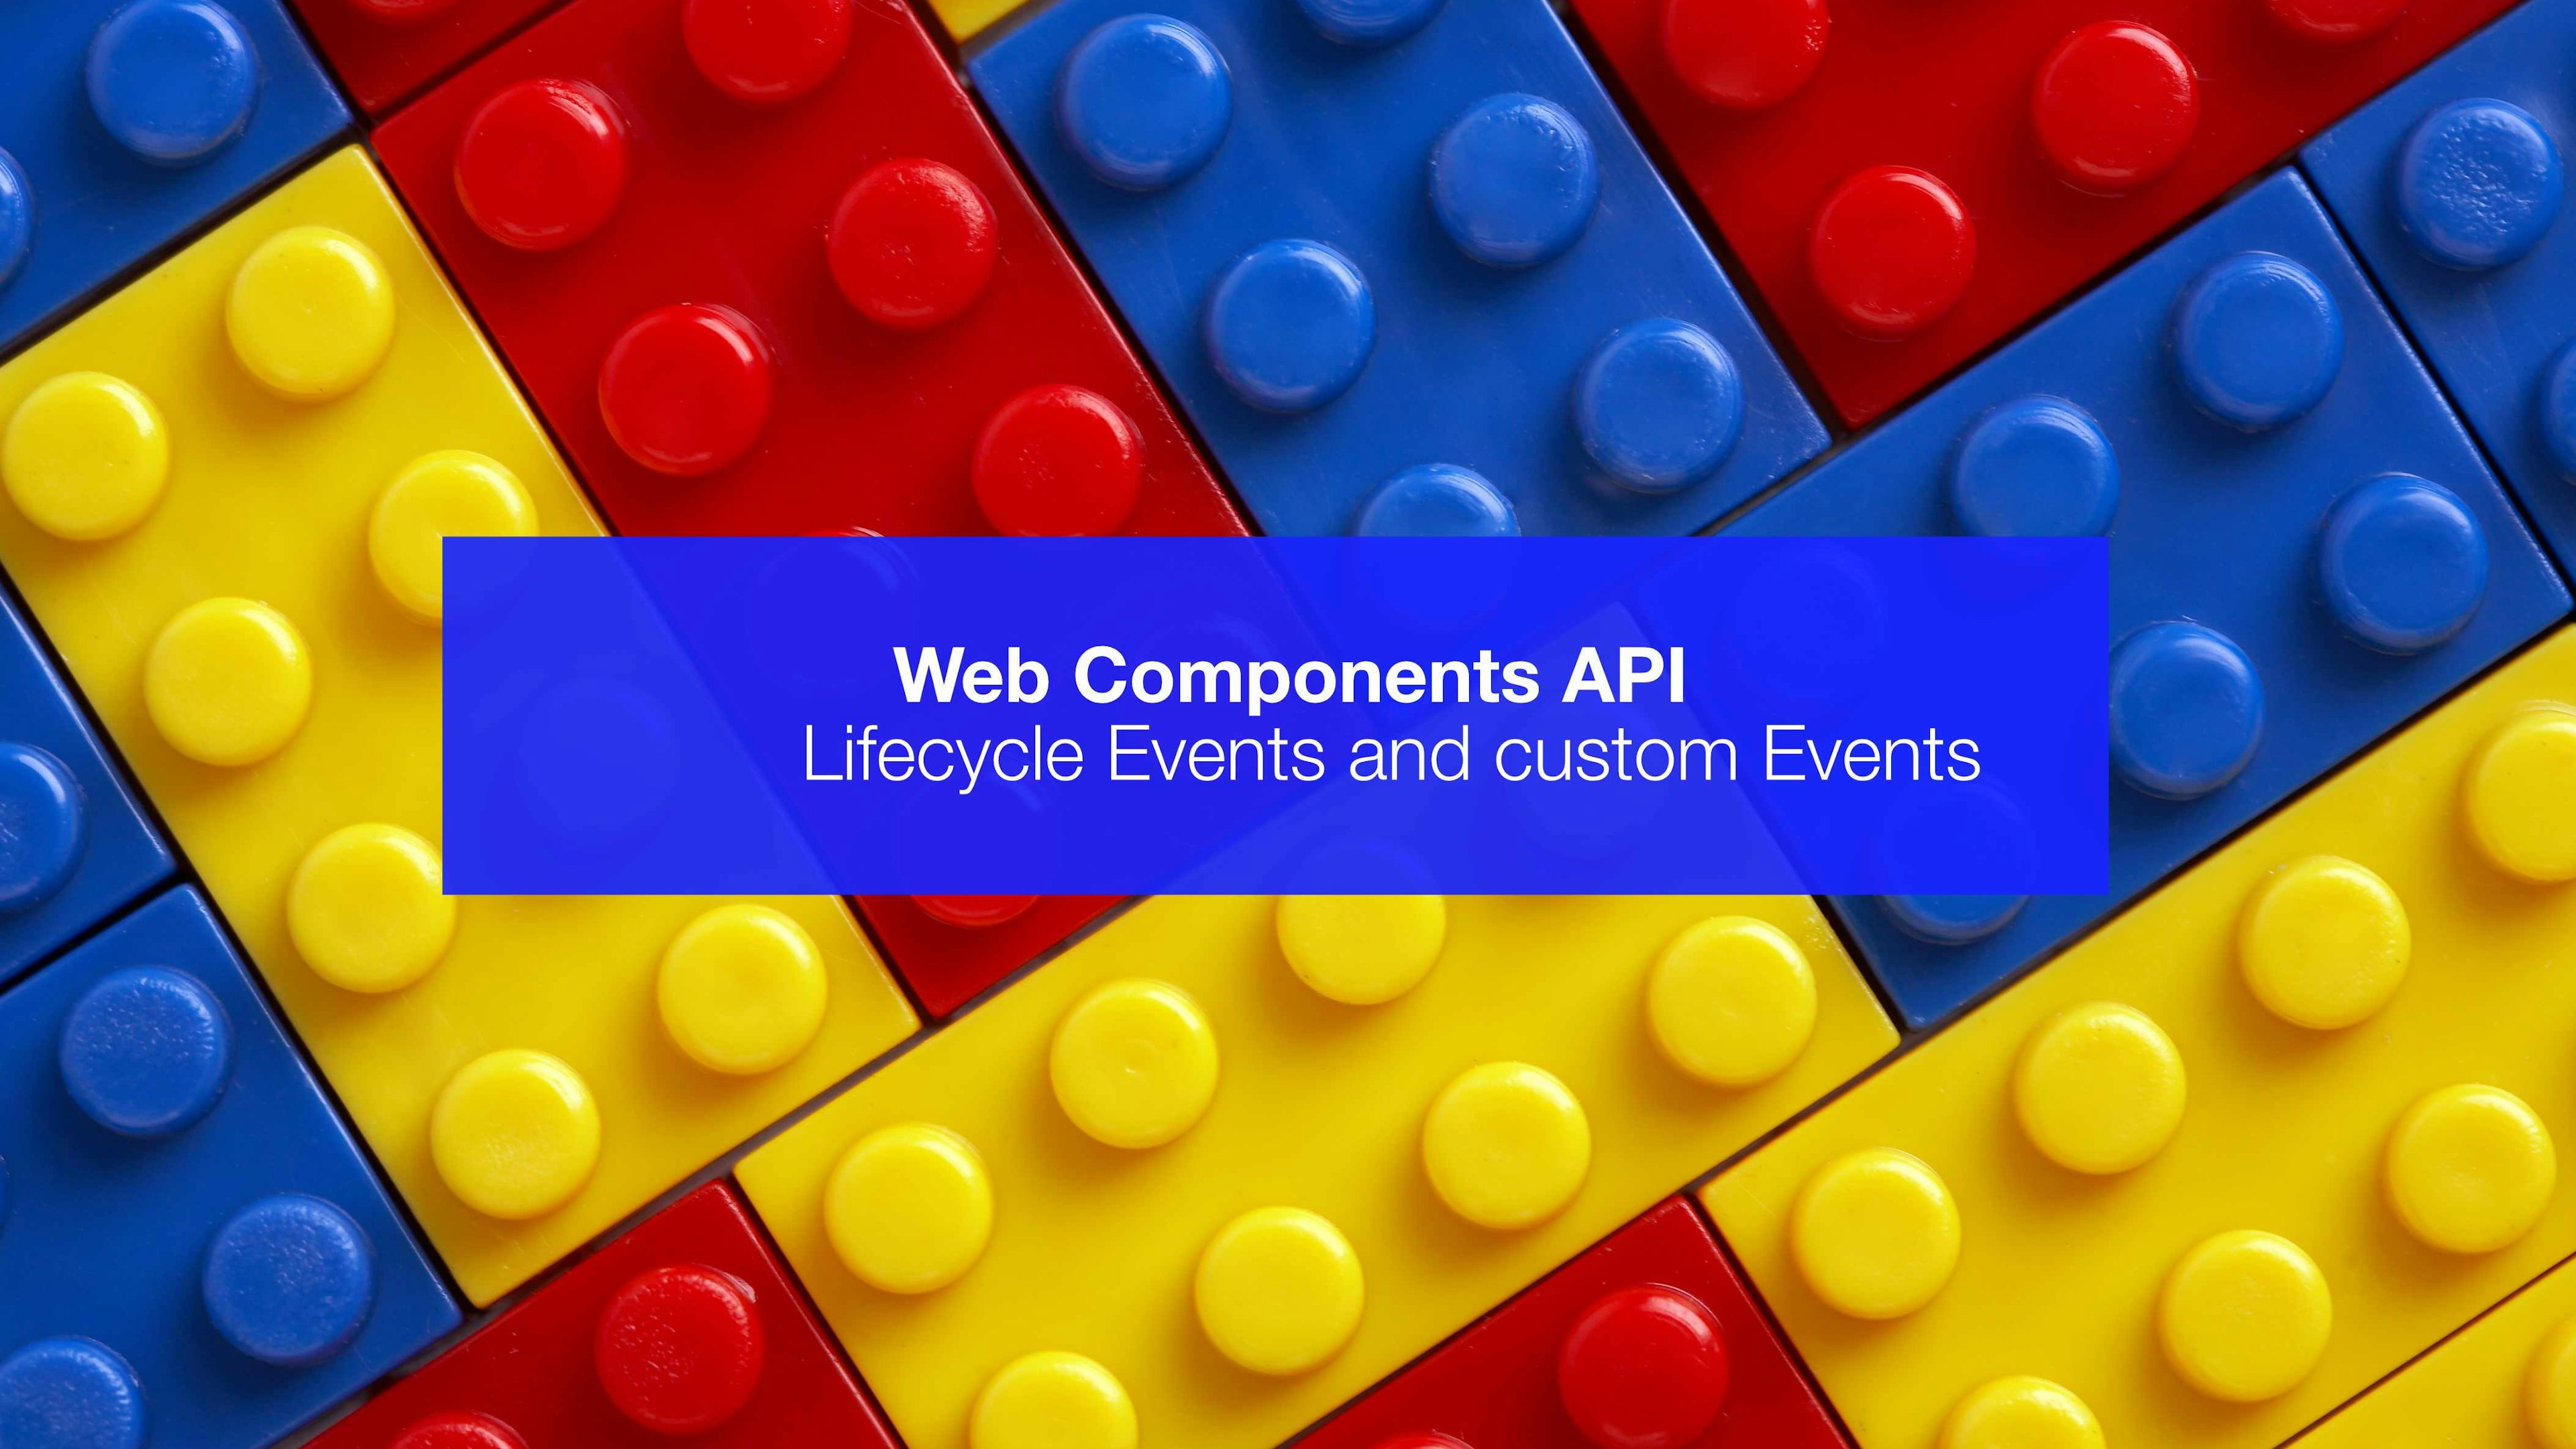 Web Components API: Lifecycle Events and Custom Events